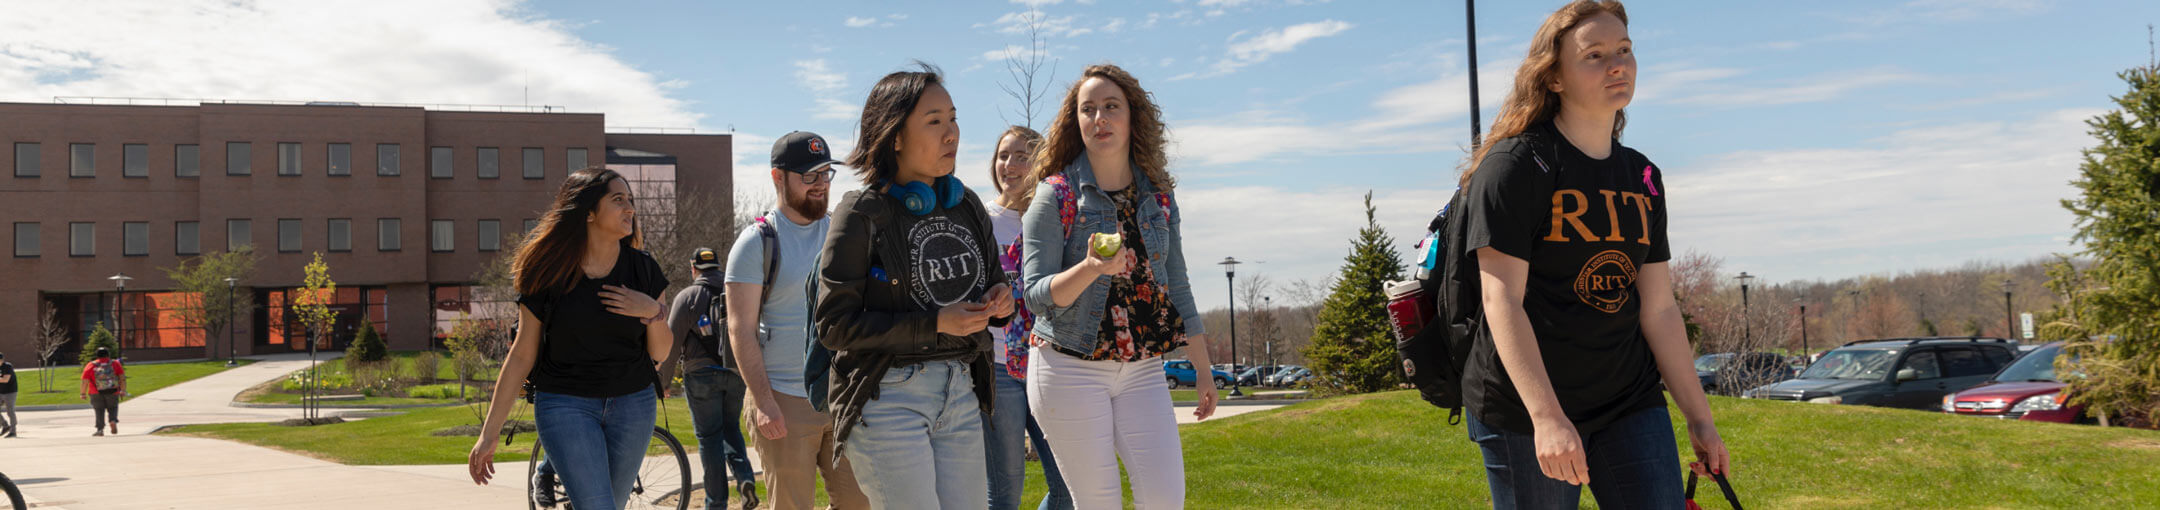 A group of RIT students walking on campus.